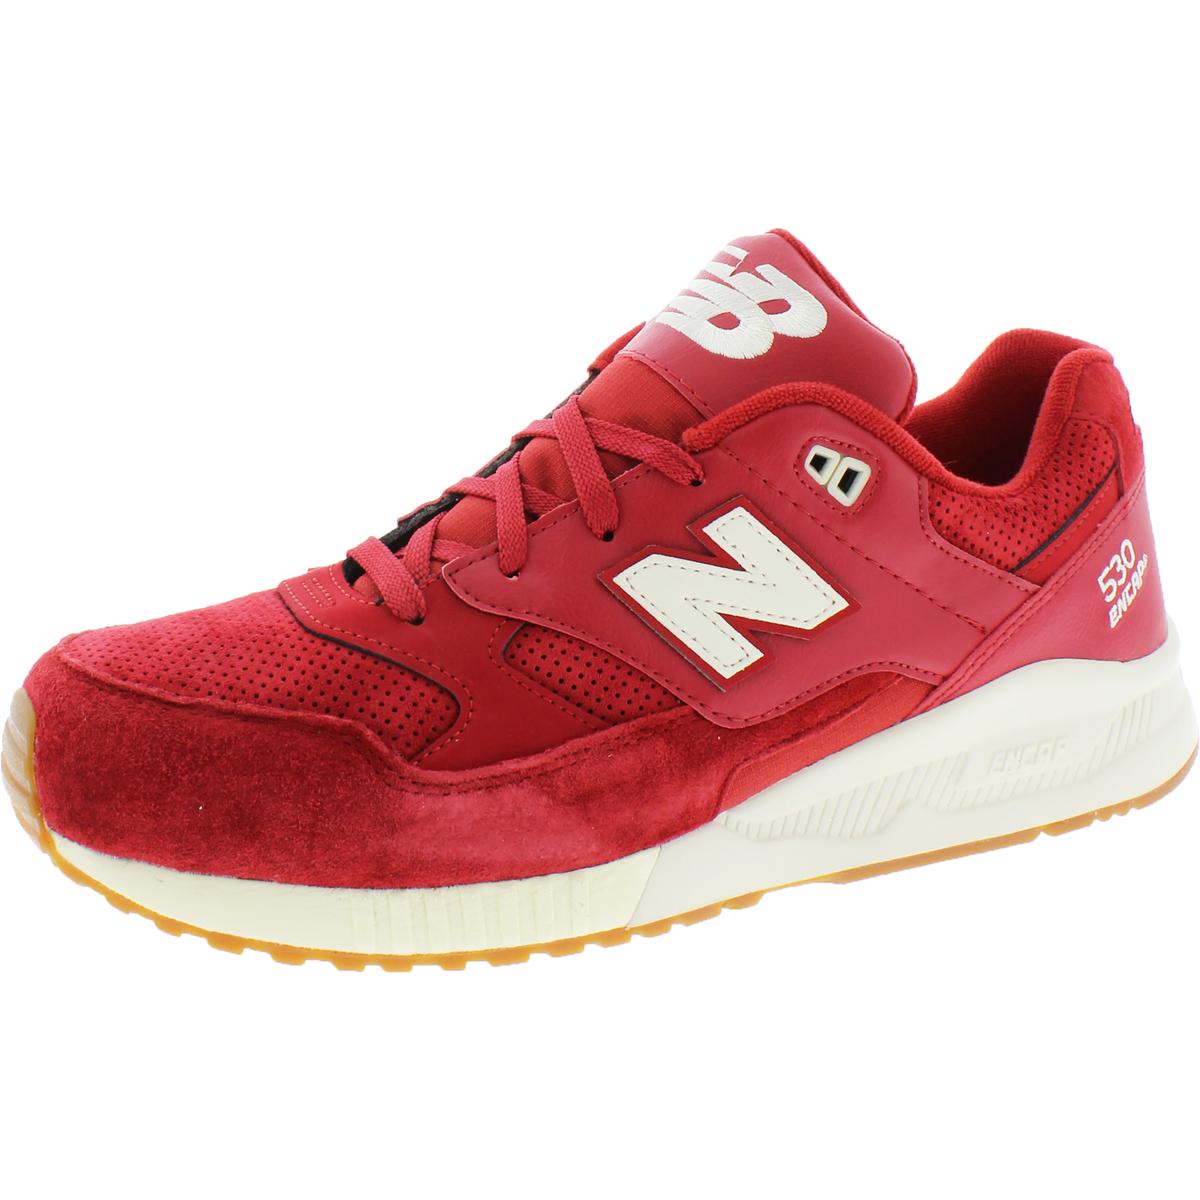 New Balance Mens Red Suede Running Shoes Athletic 10.5 Medium (D) BHFO ...